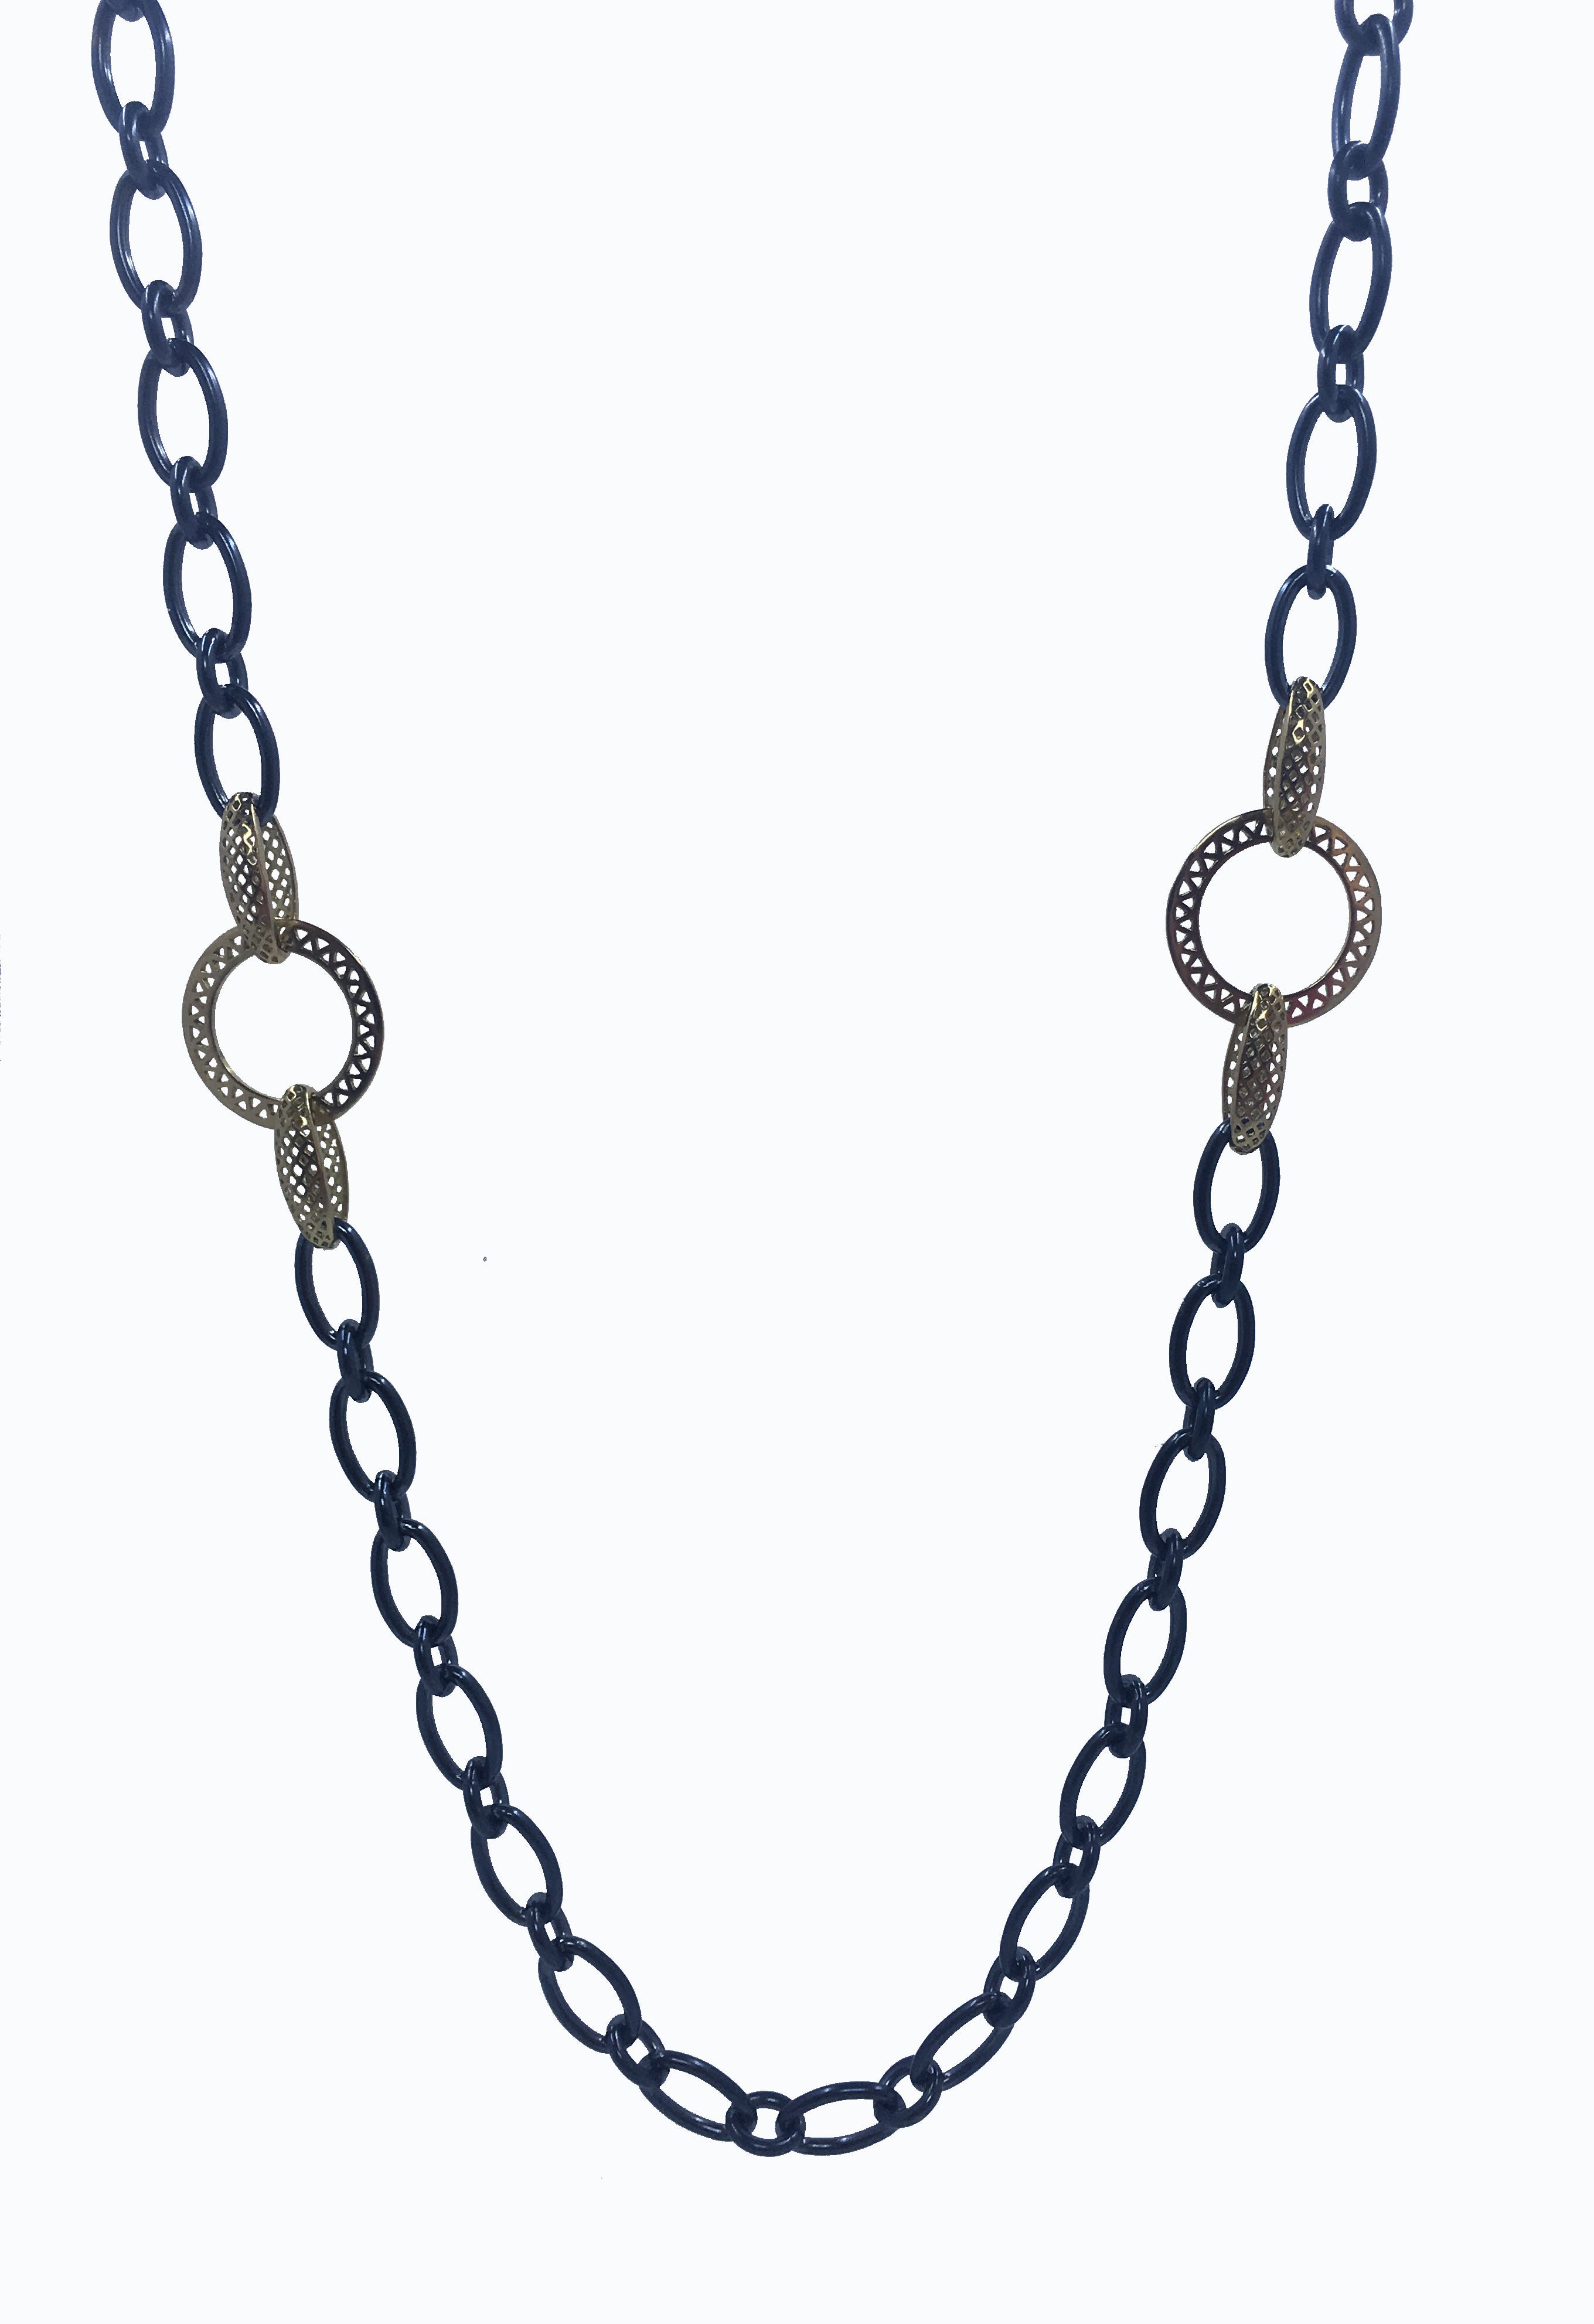 Oxidized Silver Chain with Crownwork® Disc Links